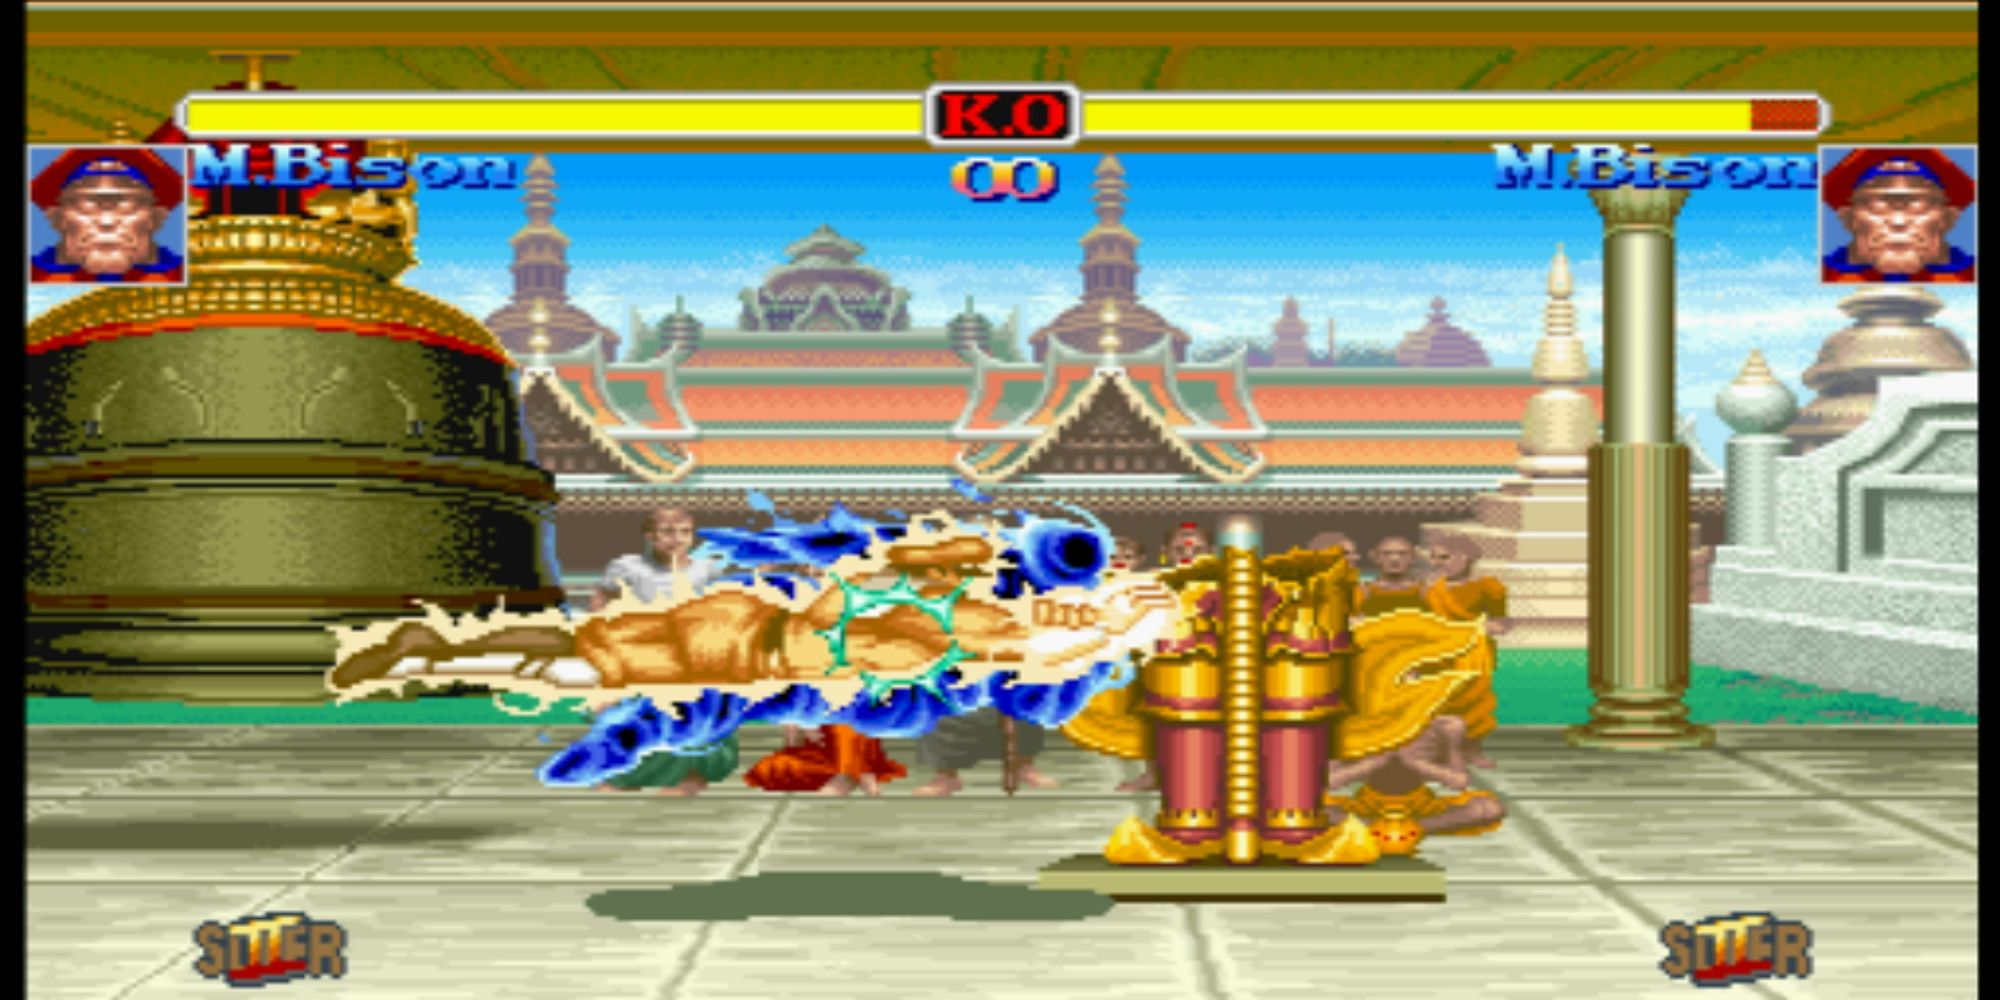 Super SF2 M Bison charges into M Bison with a Psycho Crusher in his Thailand Temple Hideout in Hyper Street Fighter 2.